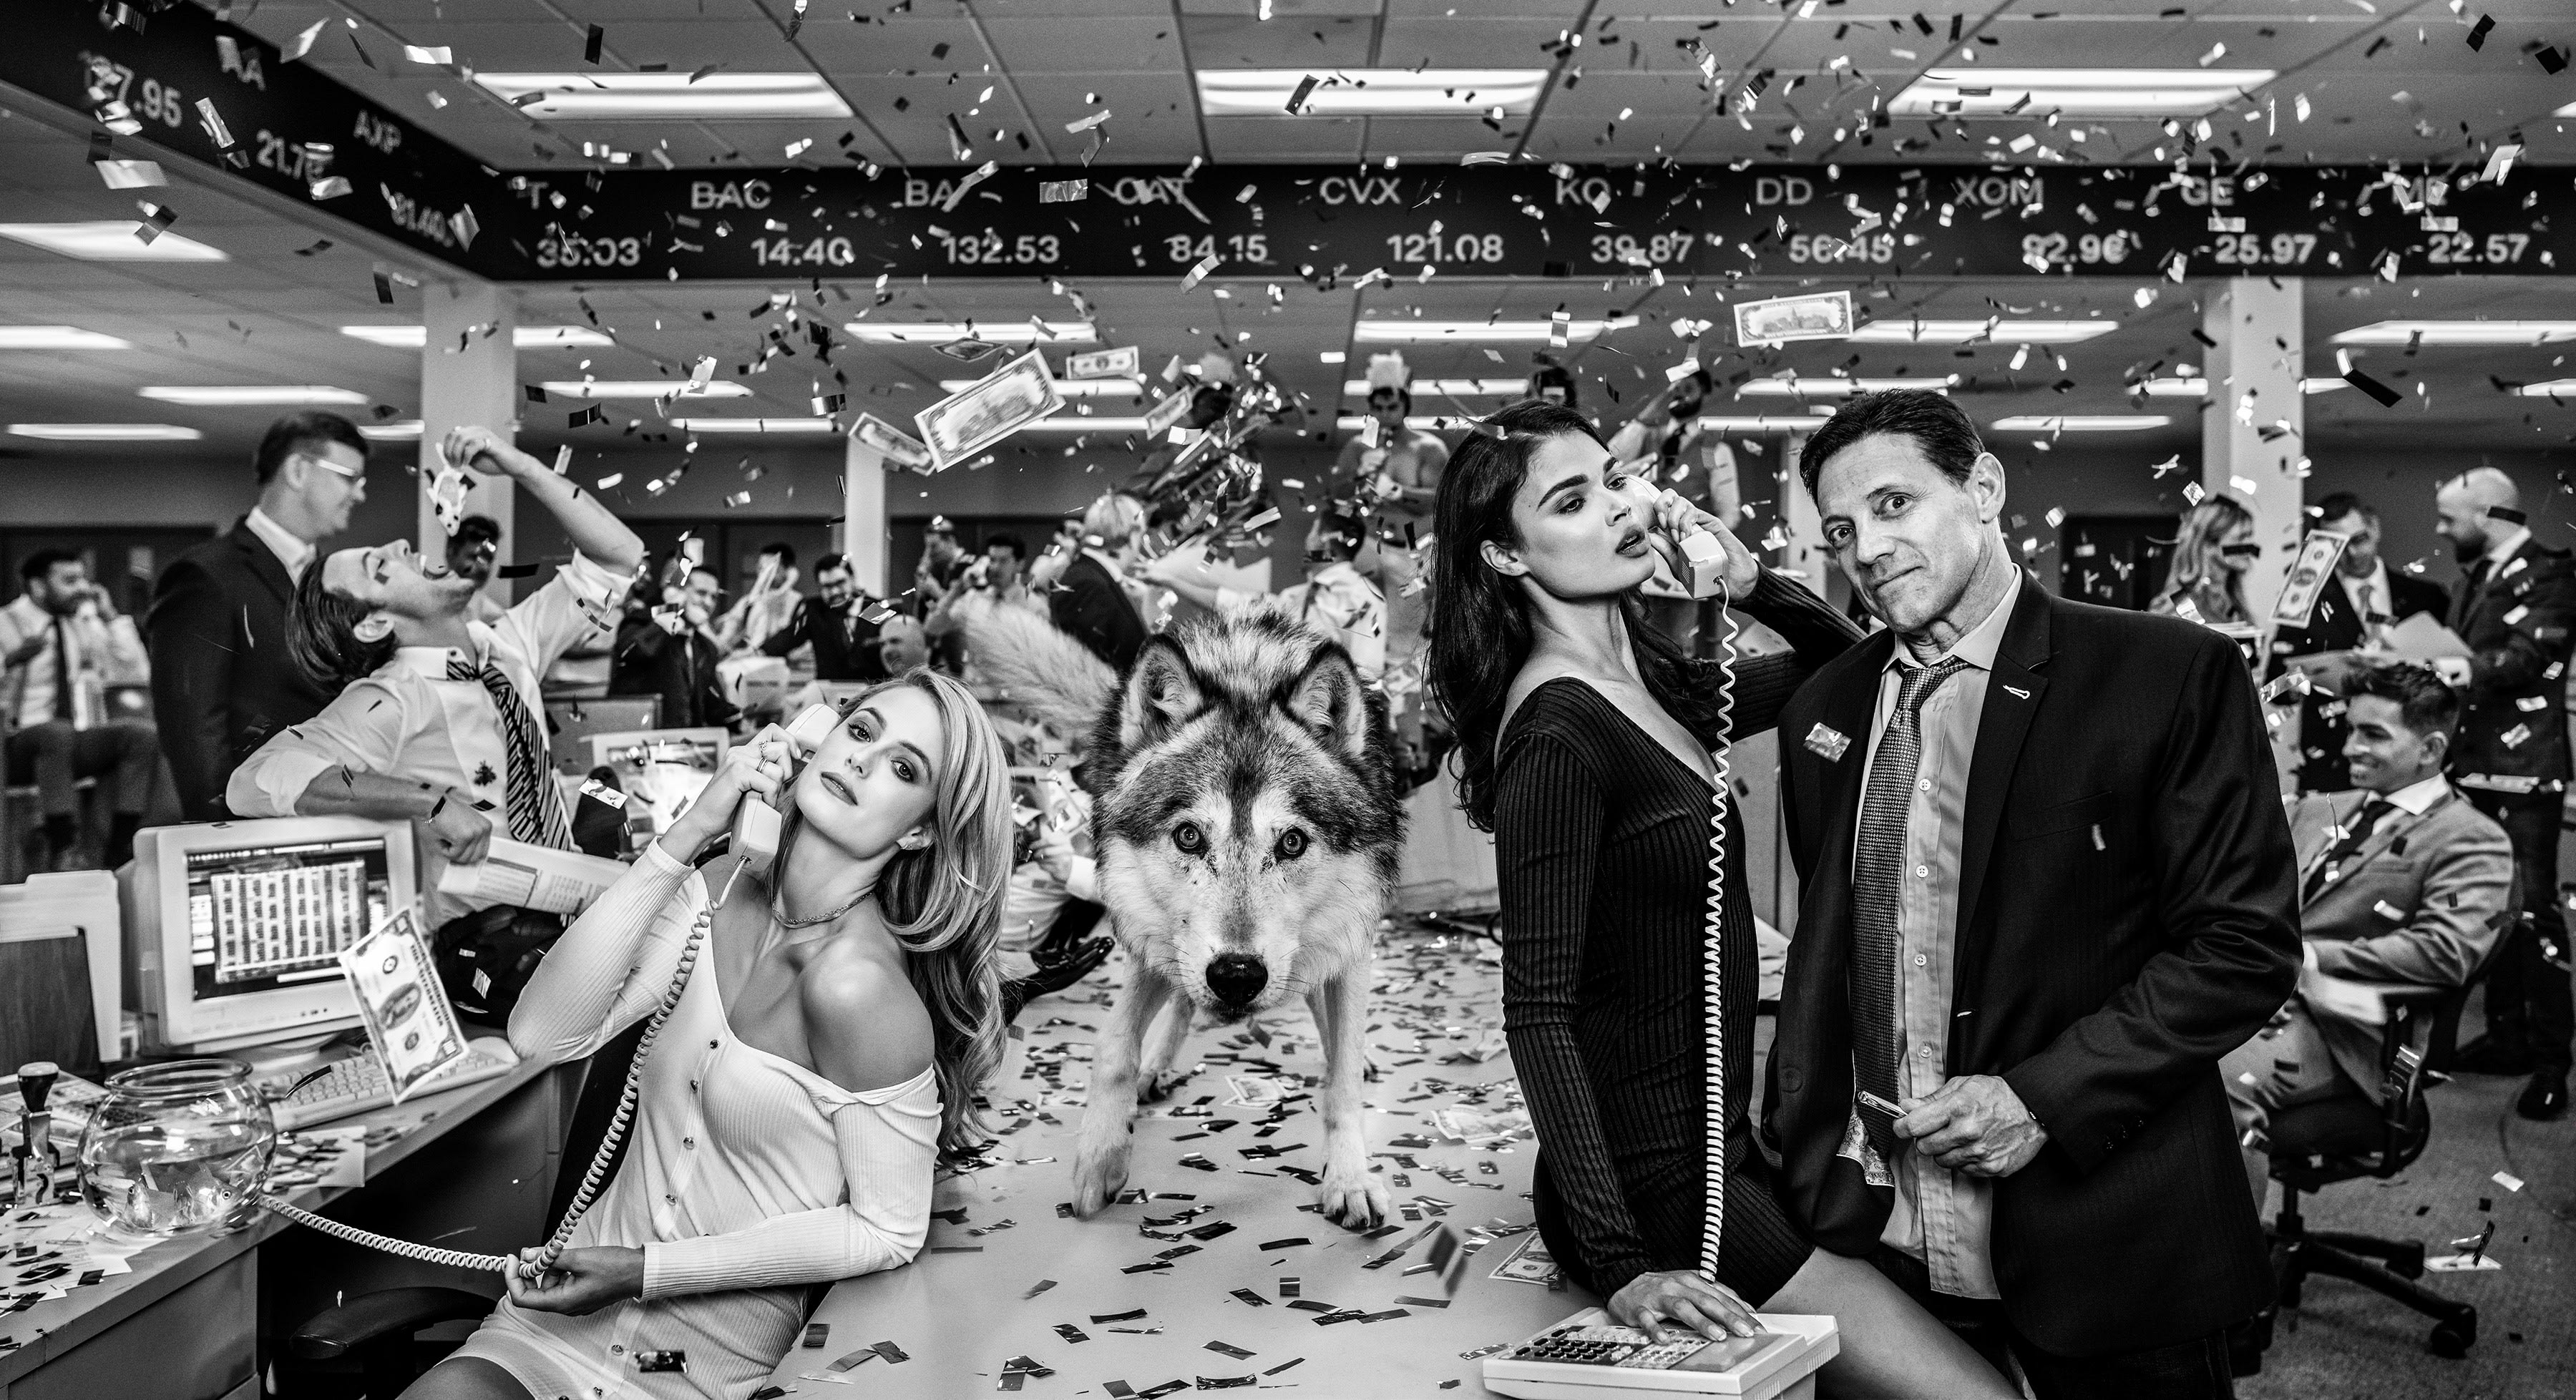 David Yarrow's photo Wolves of Wall Street with Belfort nets $000